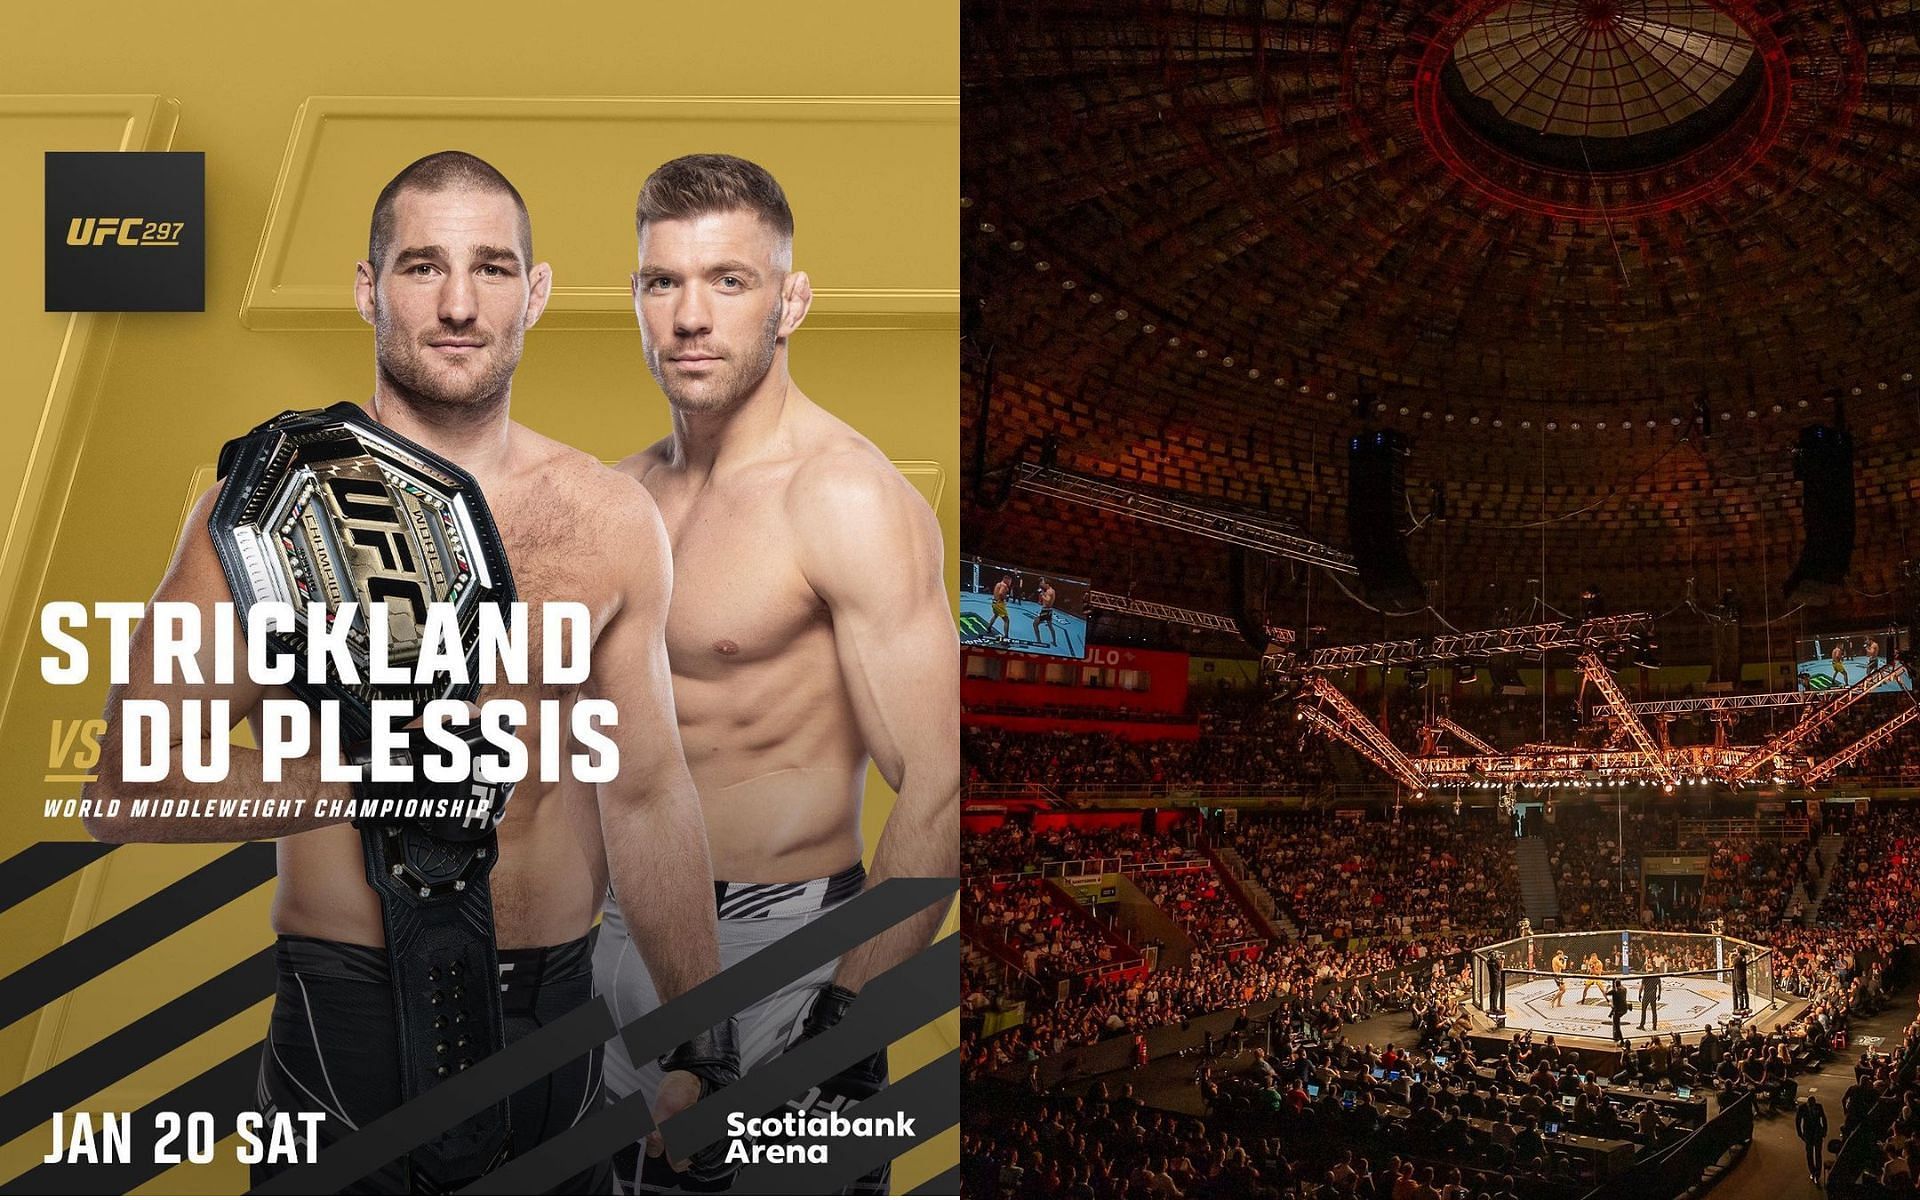 UFC 297 poster (left) and Fans in an arena ahead of a UFC fight (right) (Image credits @ufc on Instagram)